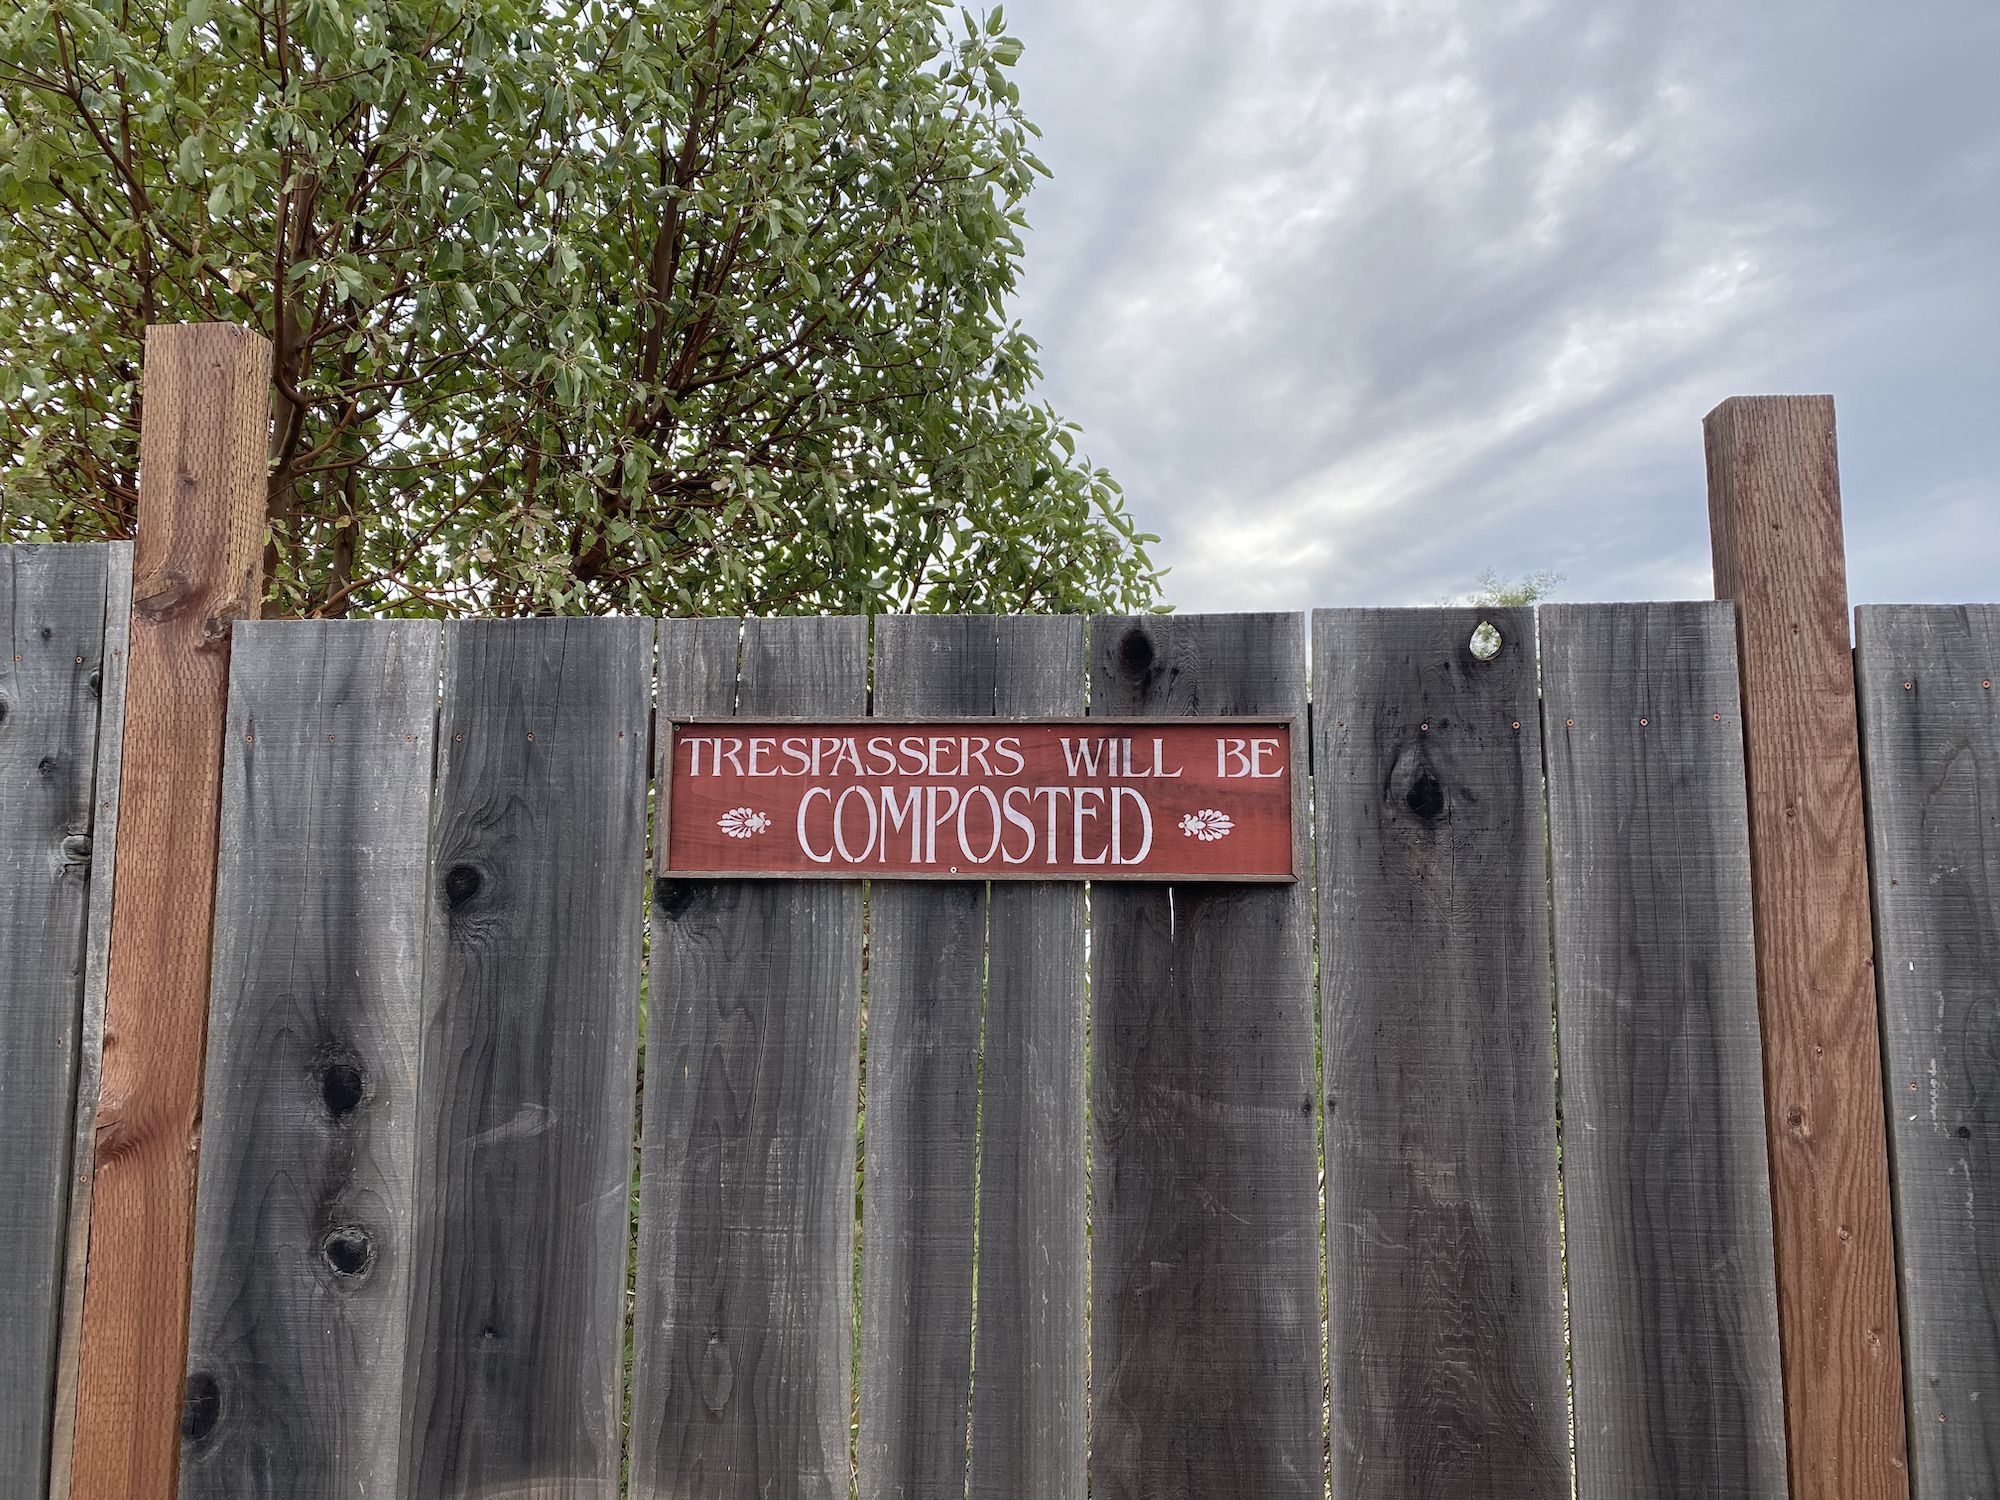 A fence with a "Trespassers will be composted" sign. 